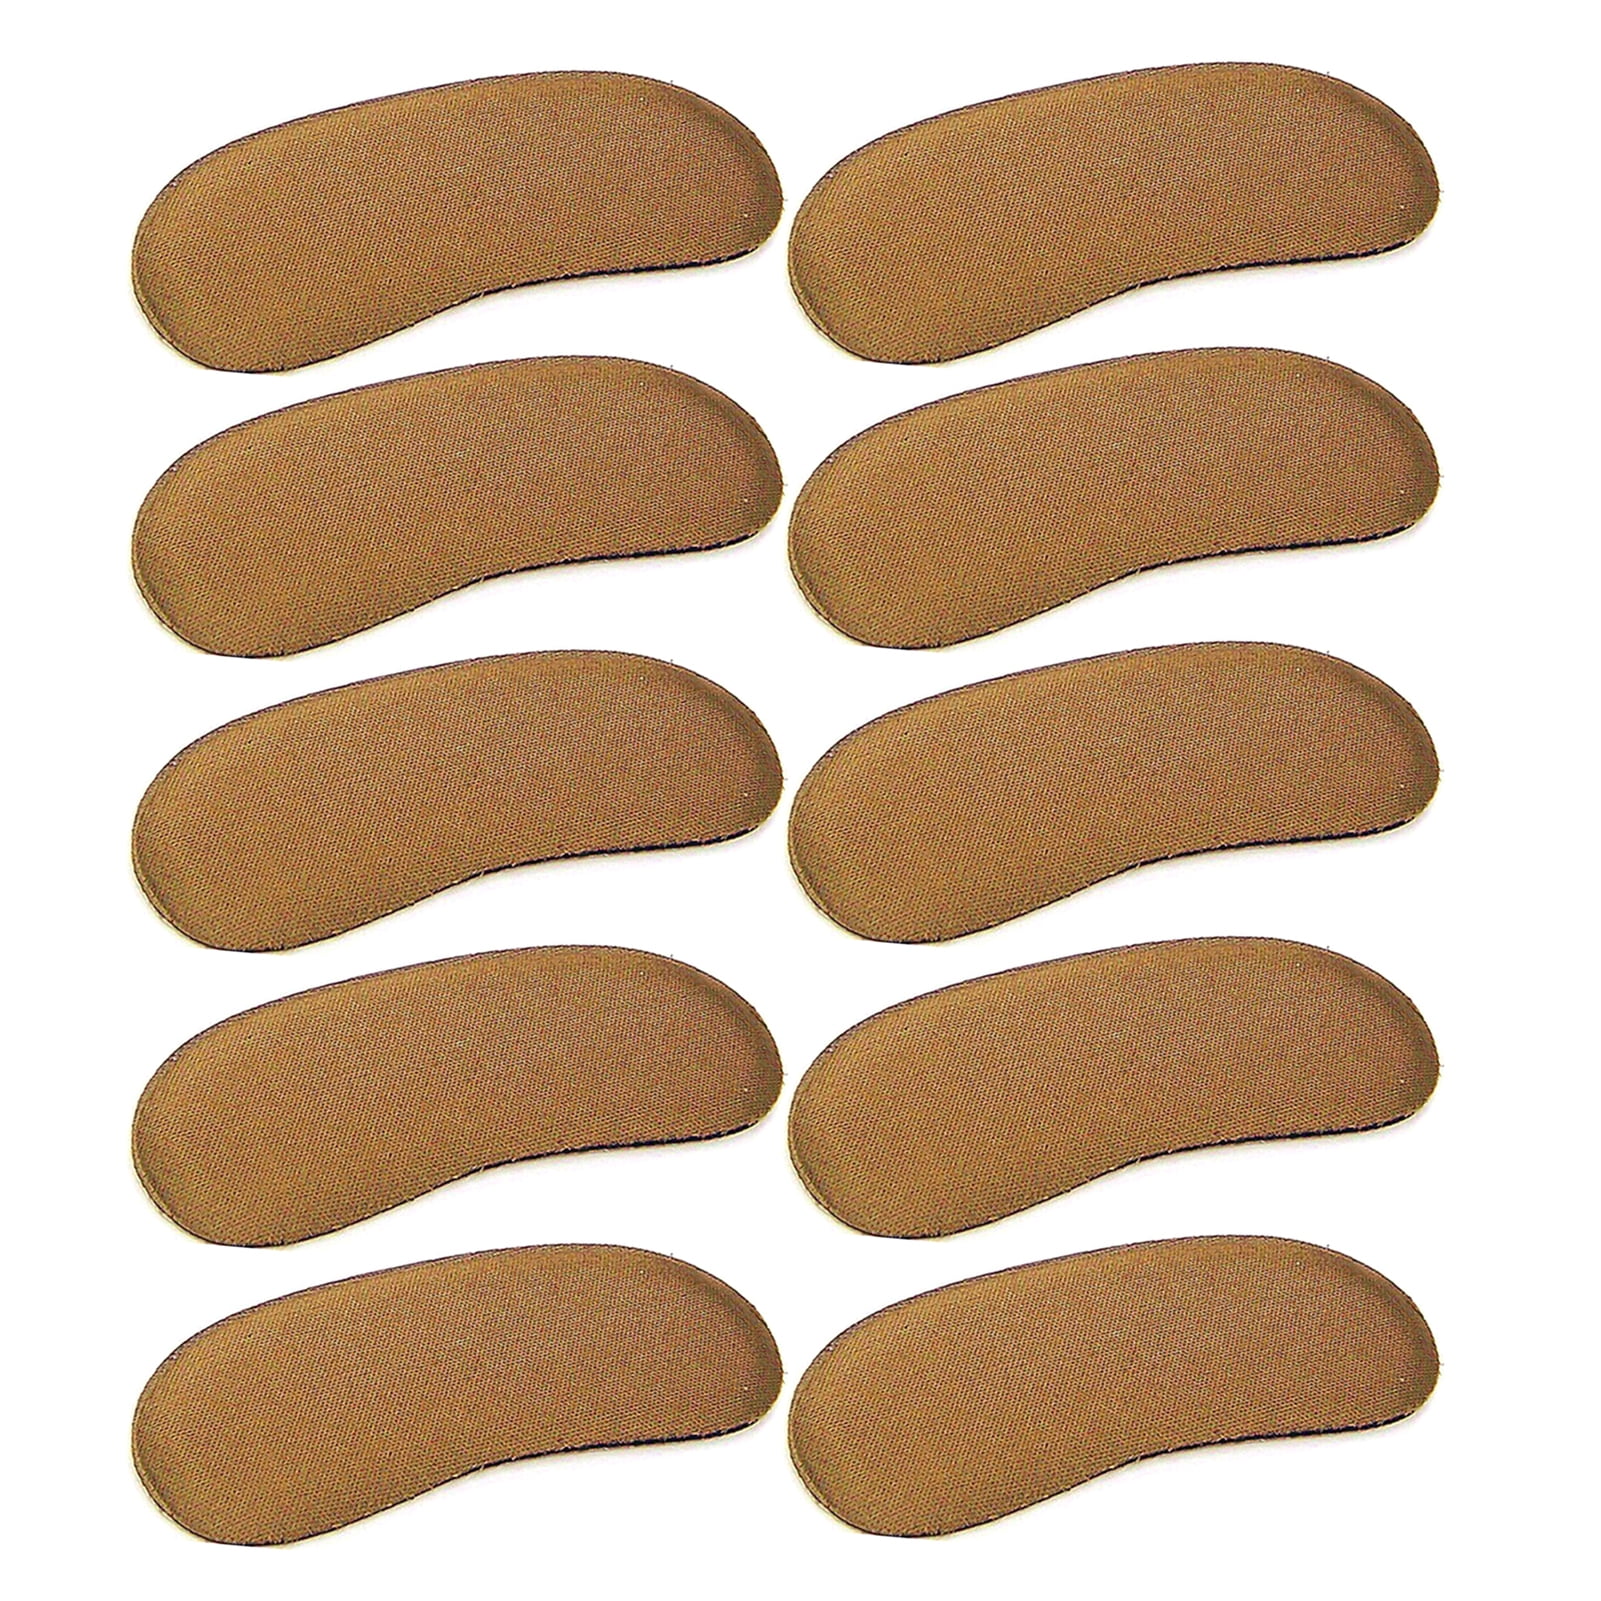 5Pairs New Fabric Sticky Gel Back Heel Grip Liner Shoe Insert Pad Cushion Insole 